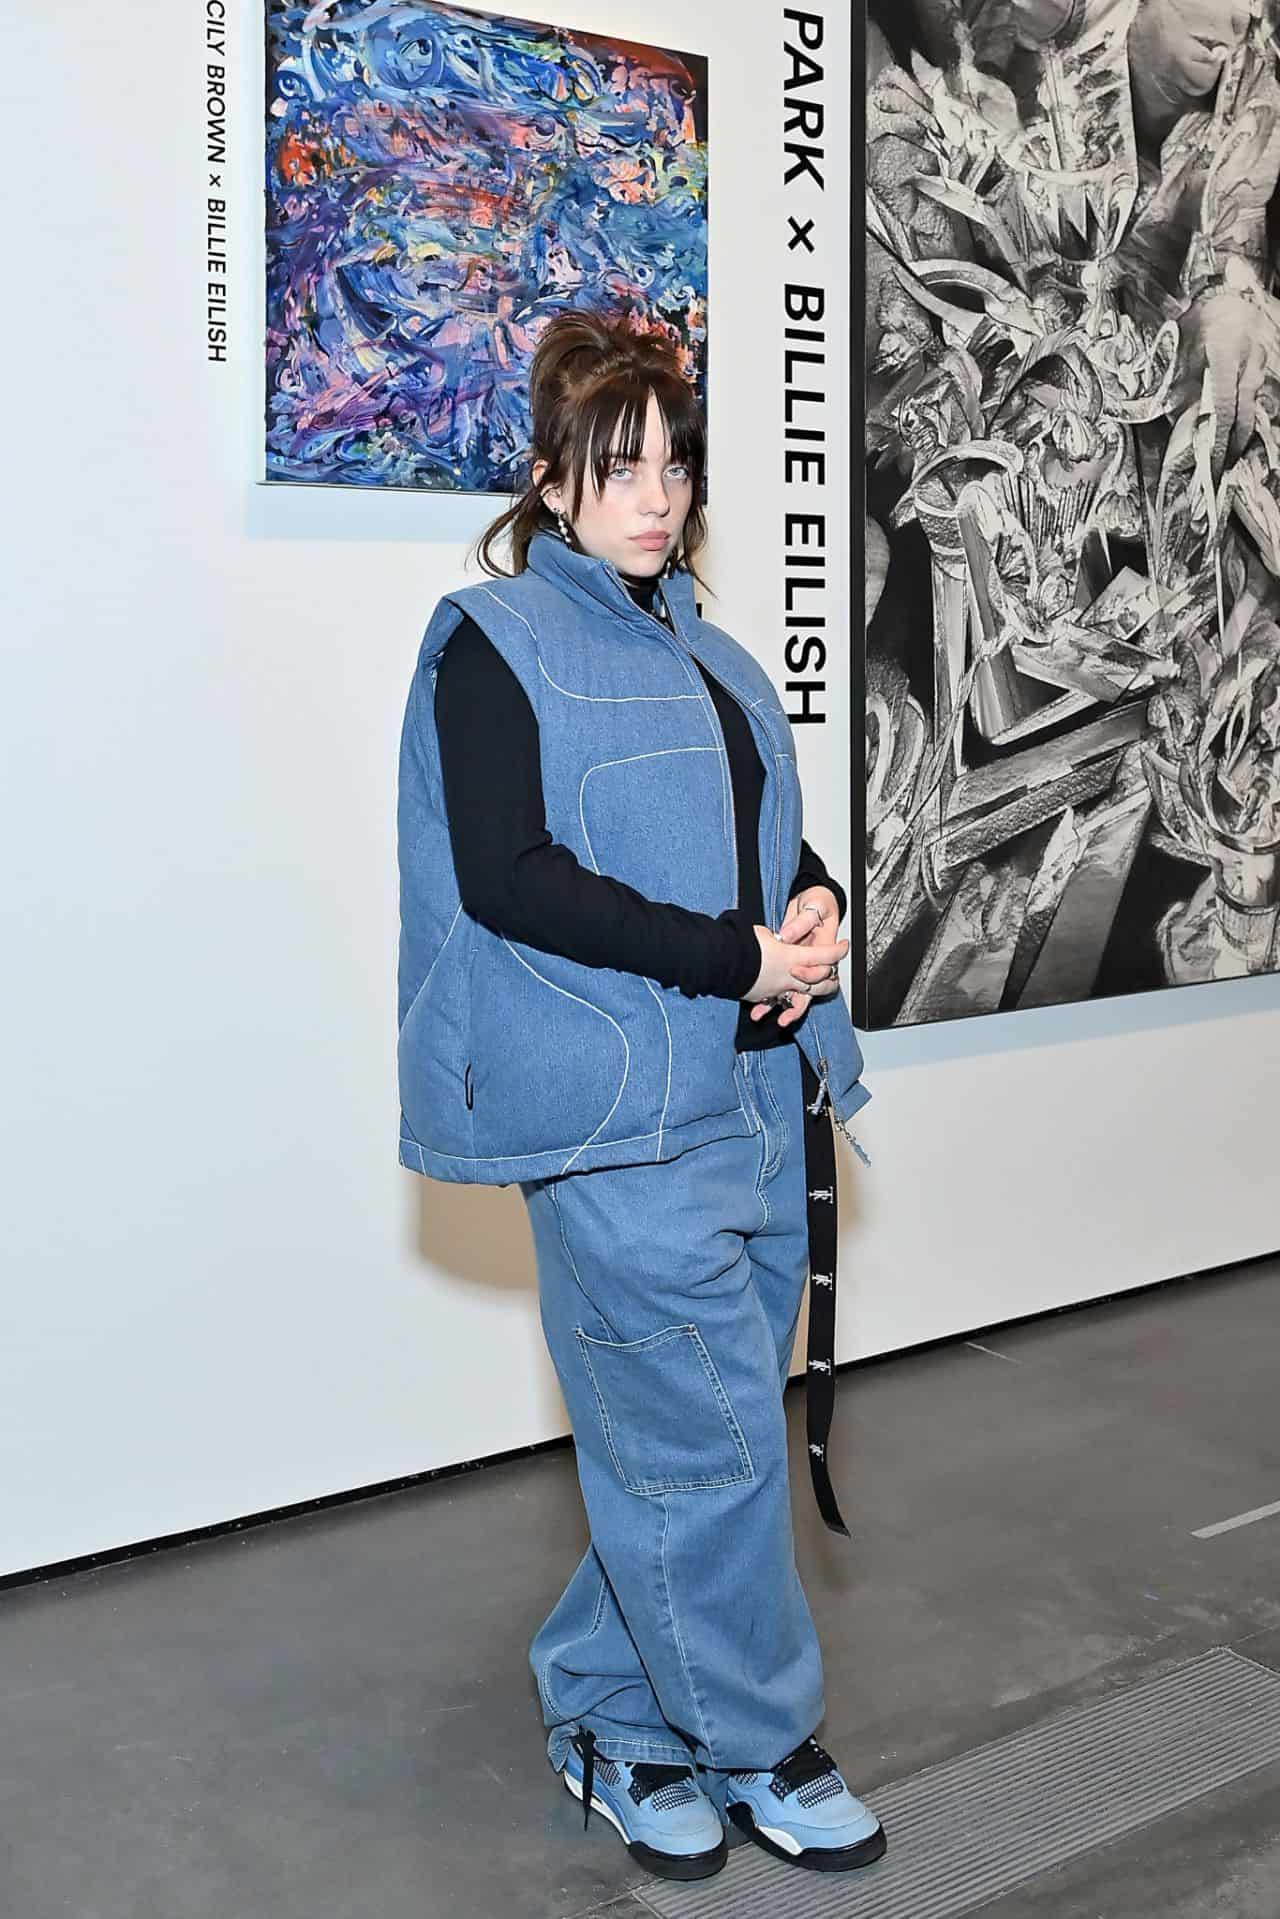 Billie Eilish Attends Interscope’s 30th-Anniversary Exhibit at the LACMA